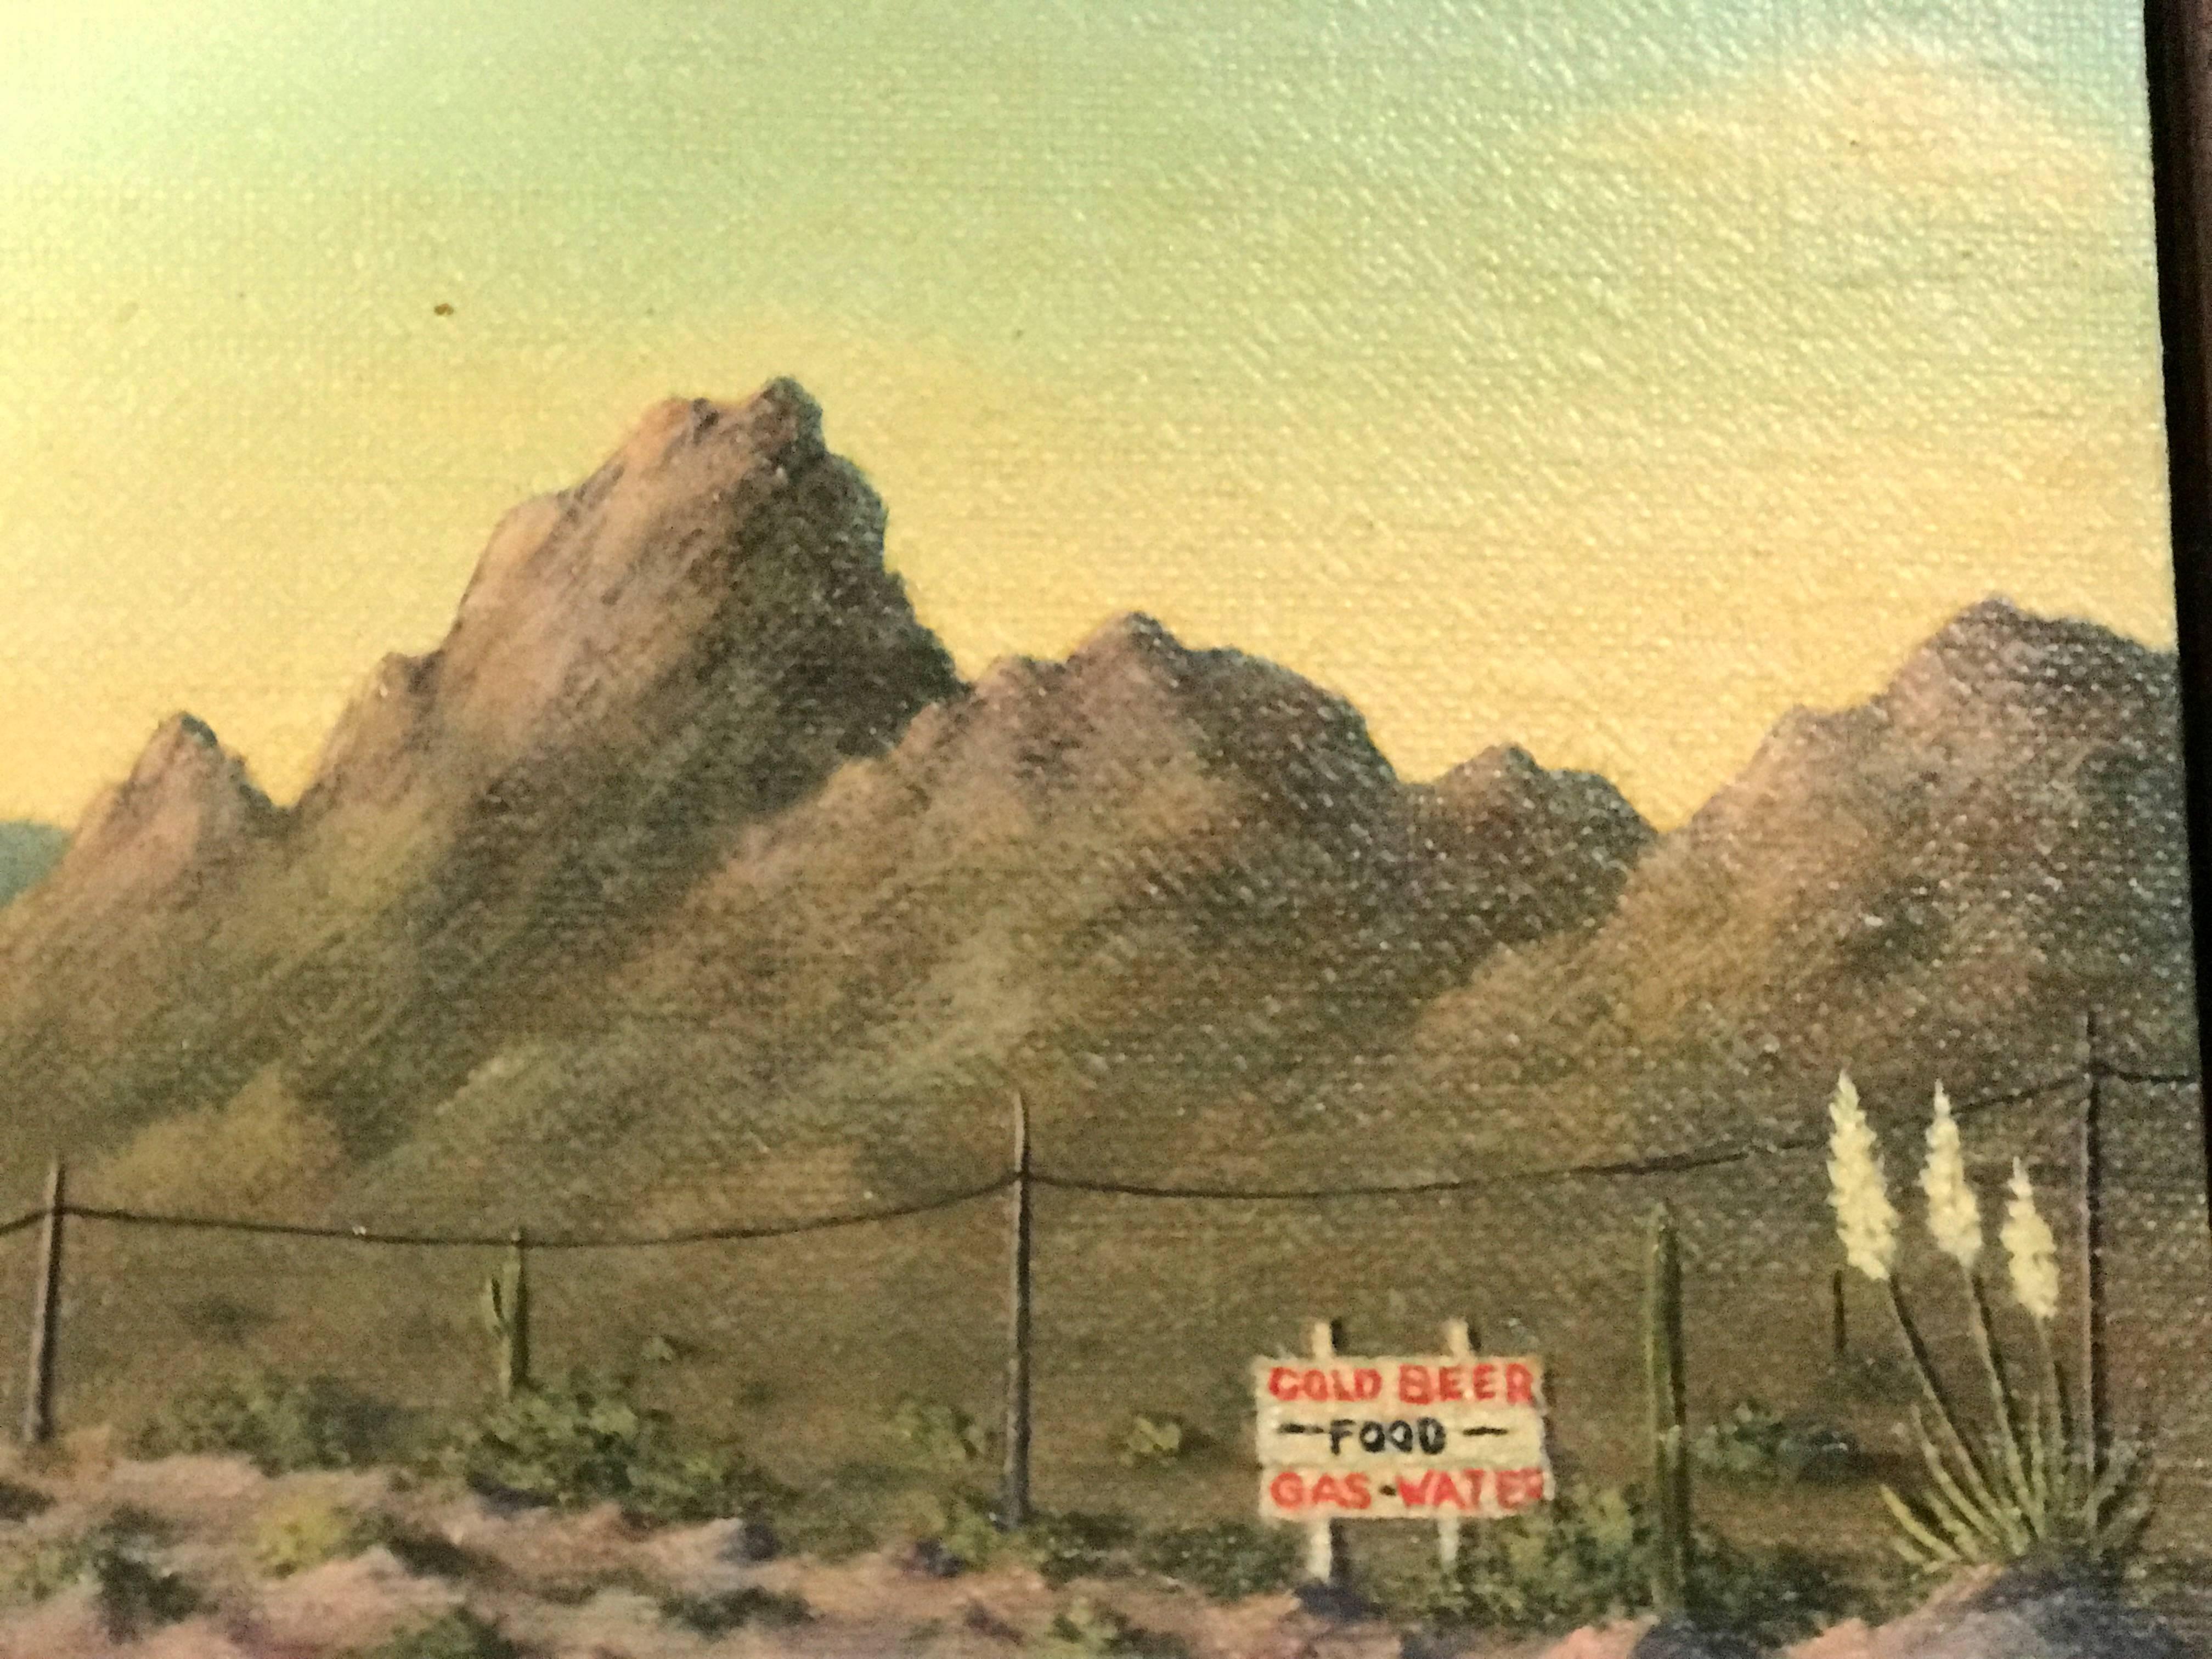 Small painting of a remote desert landscape depicting roadside sign and small market. Signed "Barkley '81".